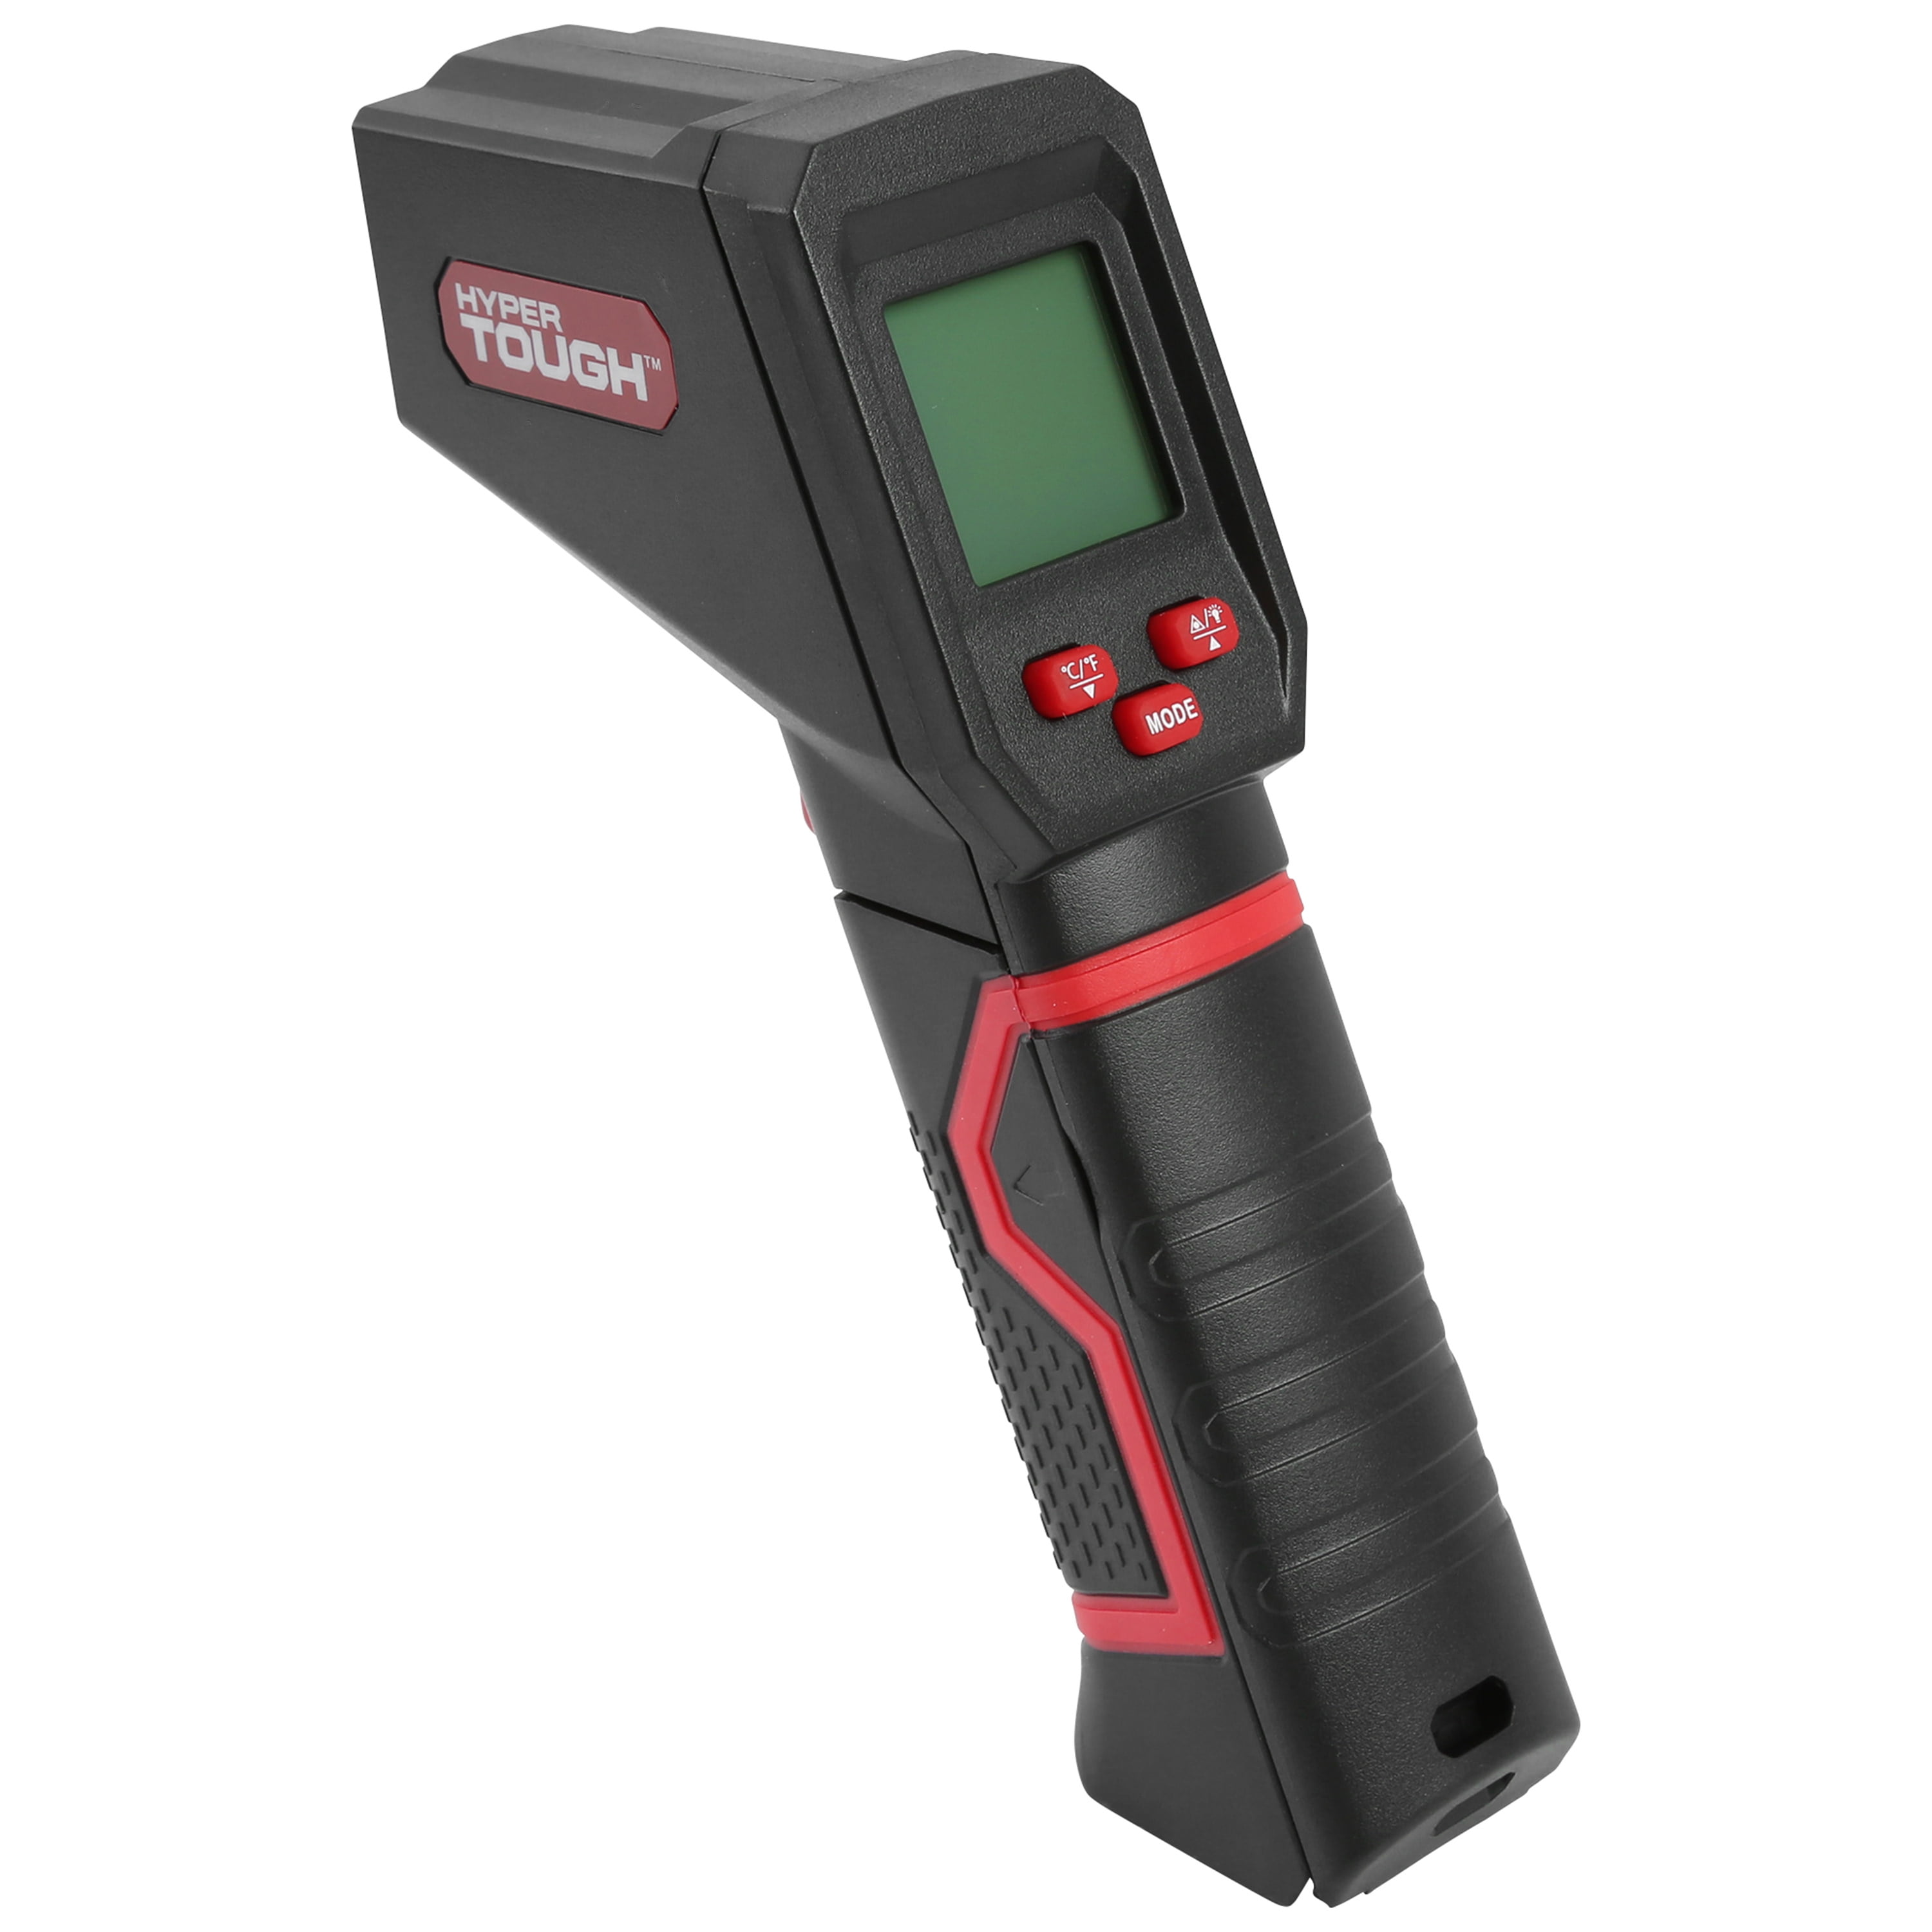 Hyper Tough Infrared Thermometer, Batteries Included, from -58 °f to 968°f,  Model 1504V 